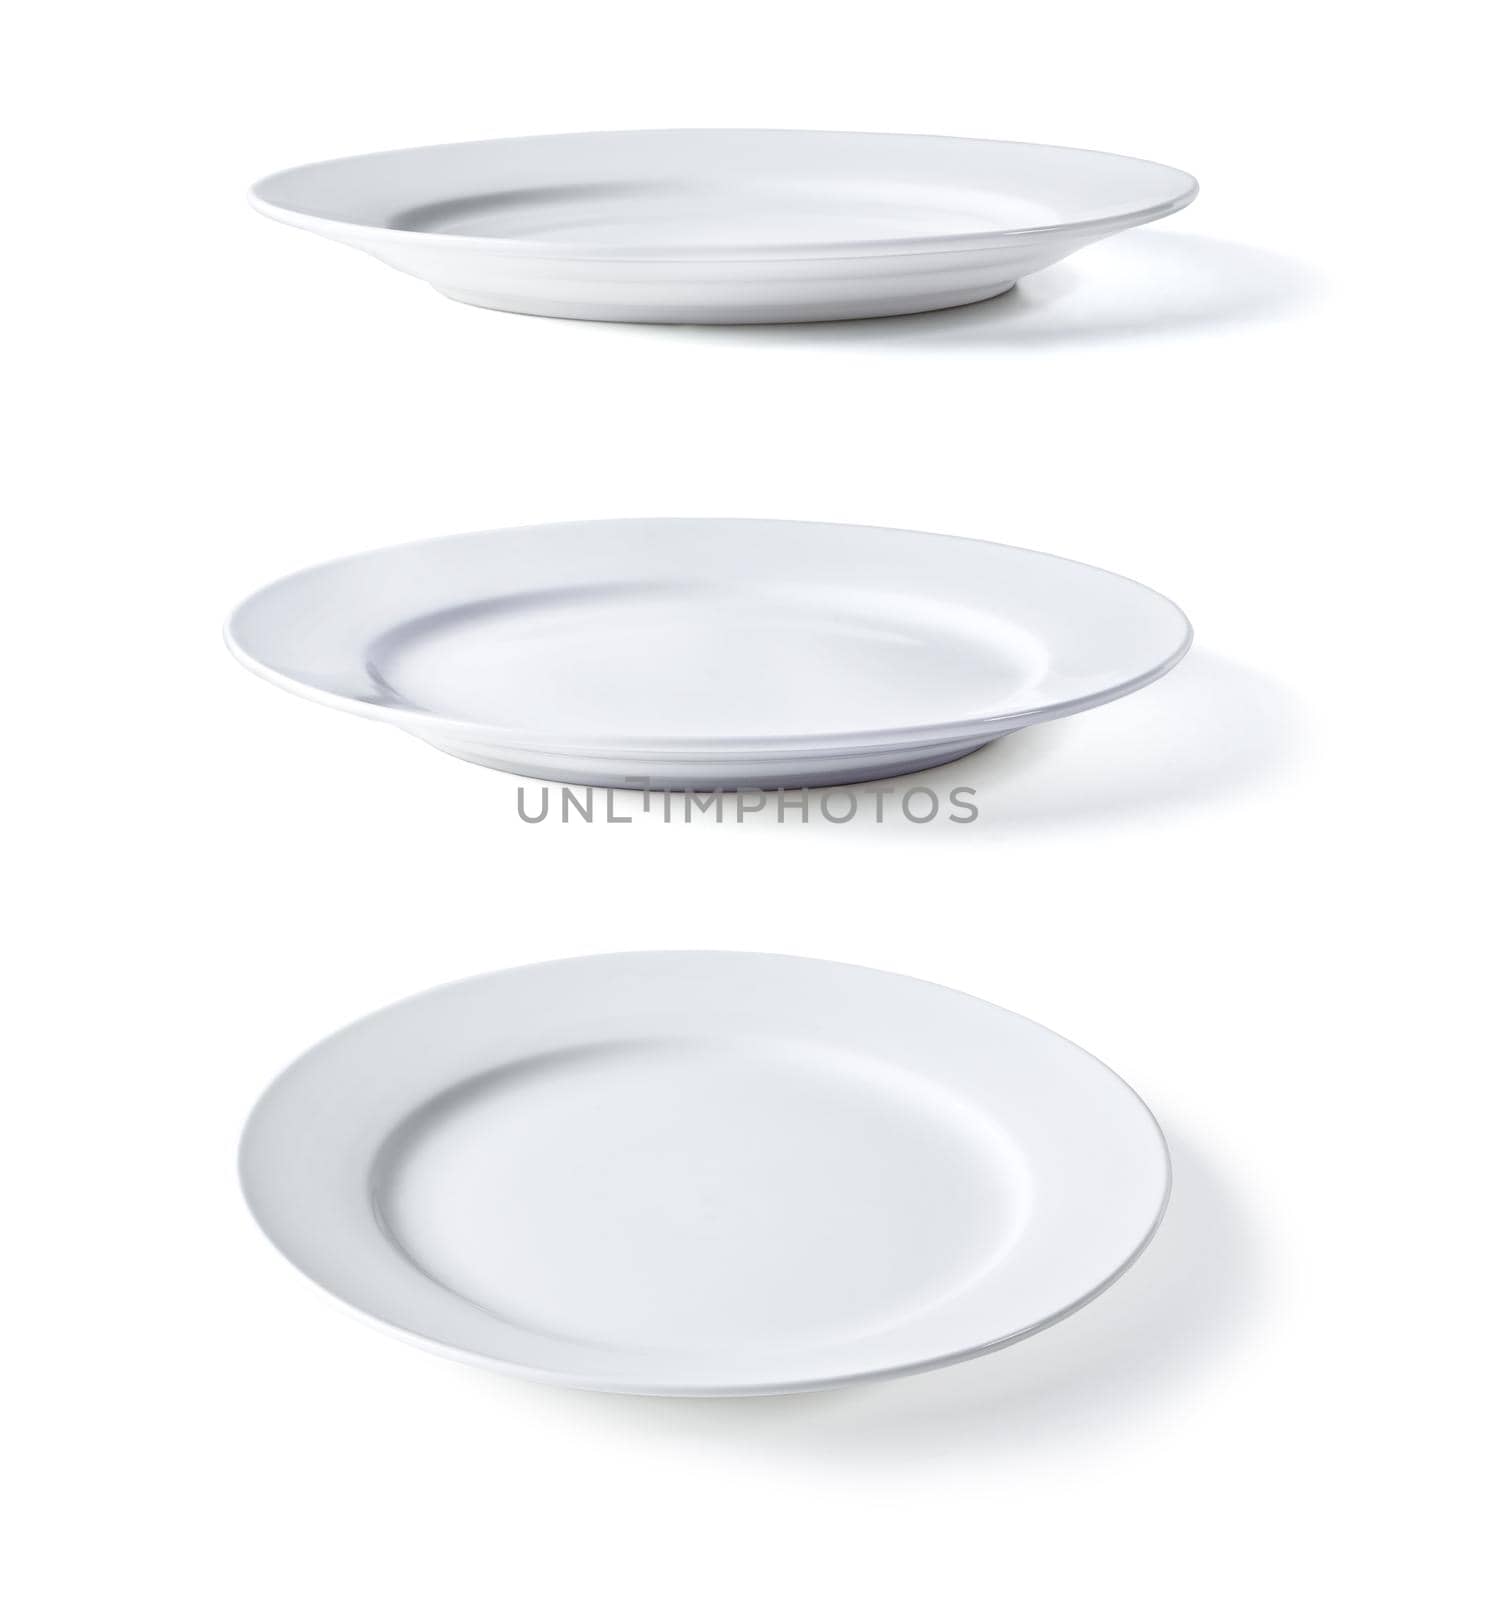 white plate in three dimensions on a white background